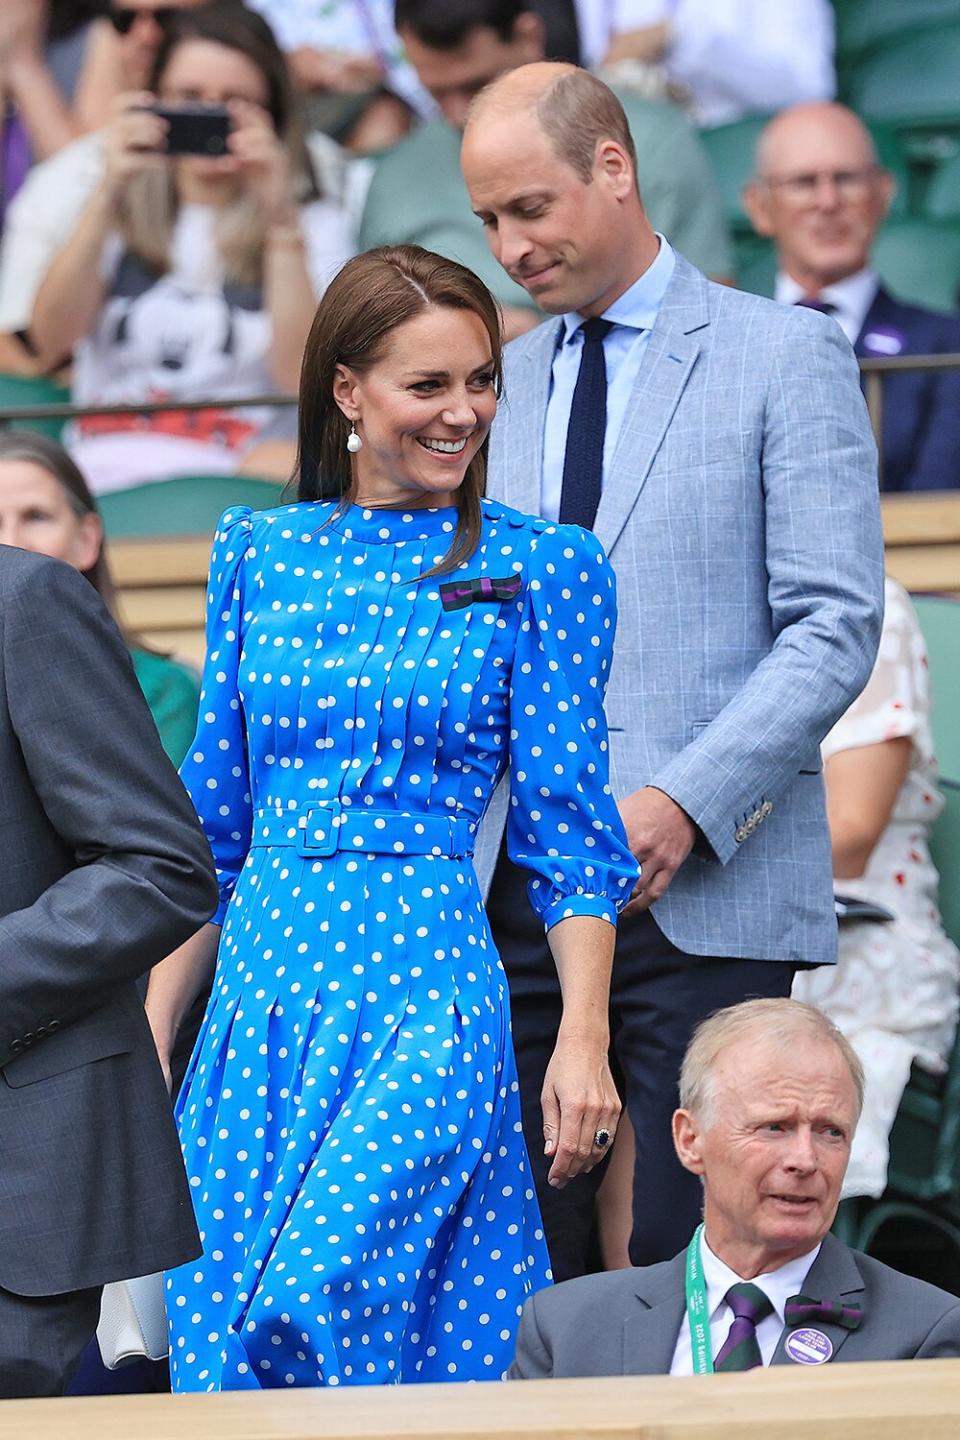 Prince William, Duke of Cambridge and Catherine, Duchess of Cambridge arrive in the Royal Box on Centre Court during day nine of The Championships Wimbledon 2022 at All England Lawn Tennis and Croquet Club on July 5, 2022 in London, England.